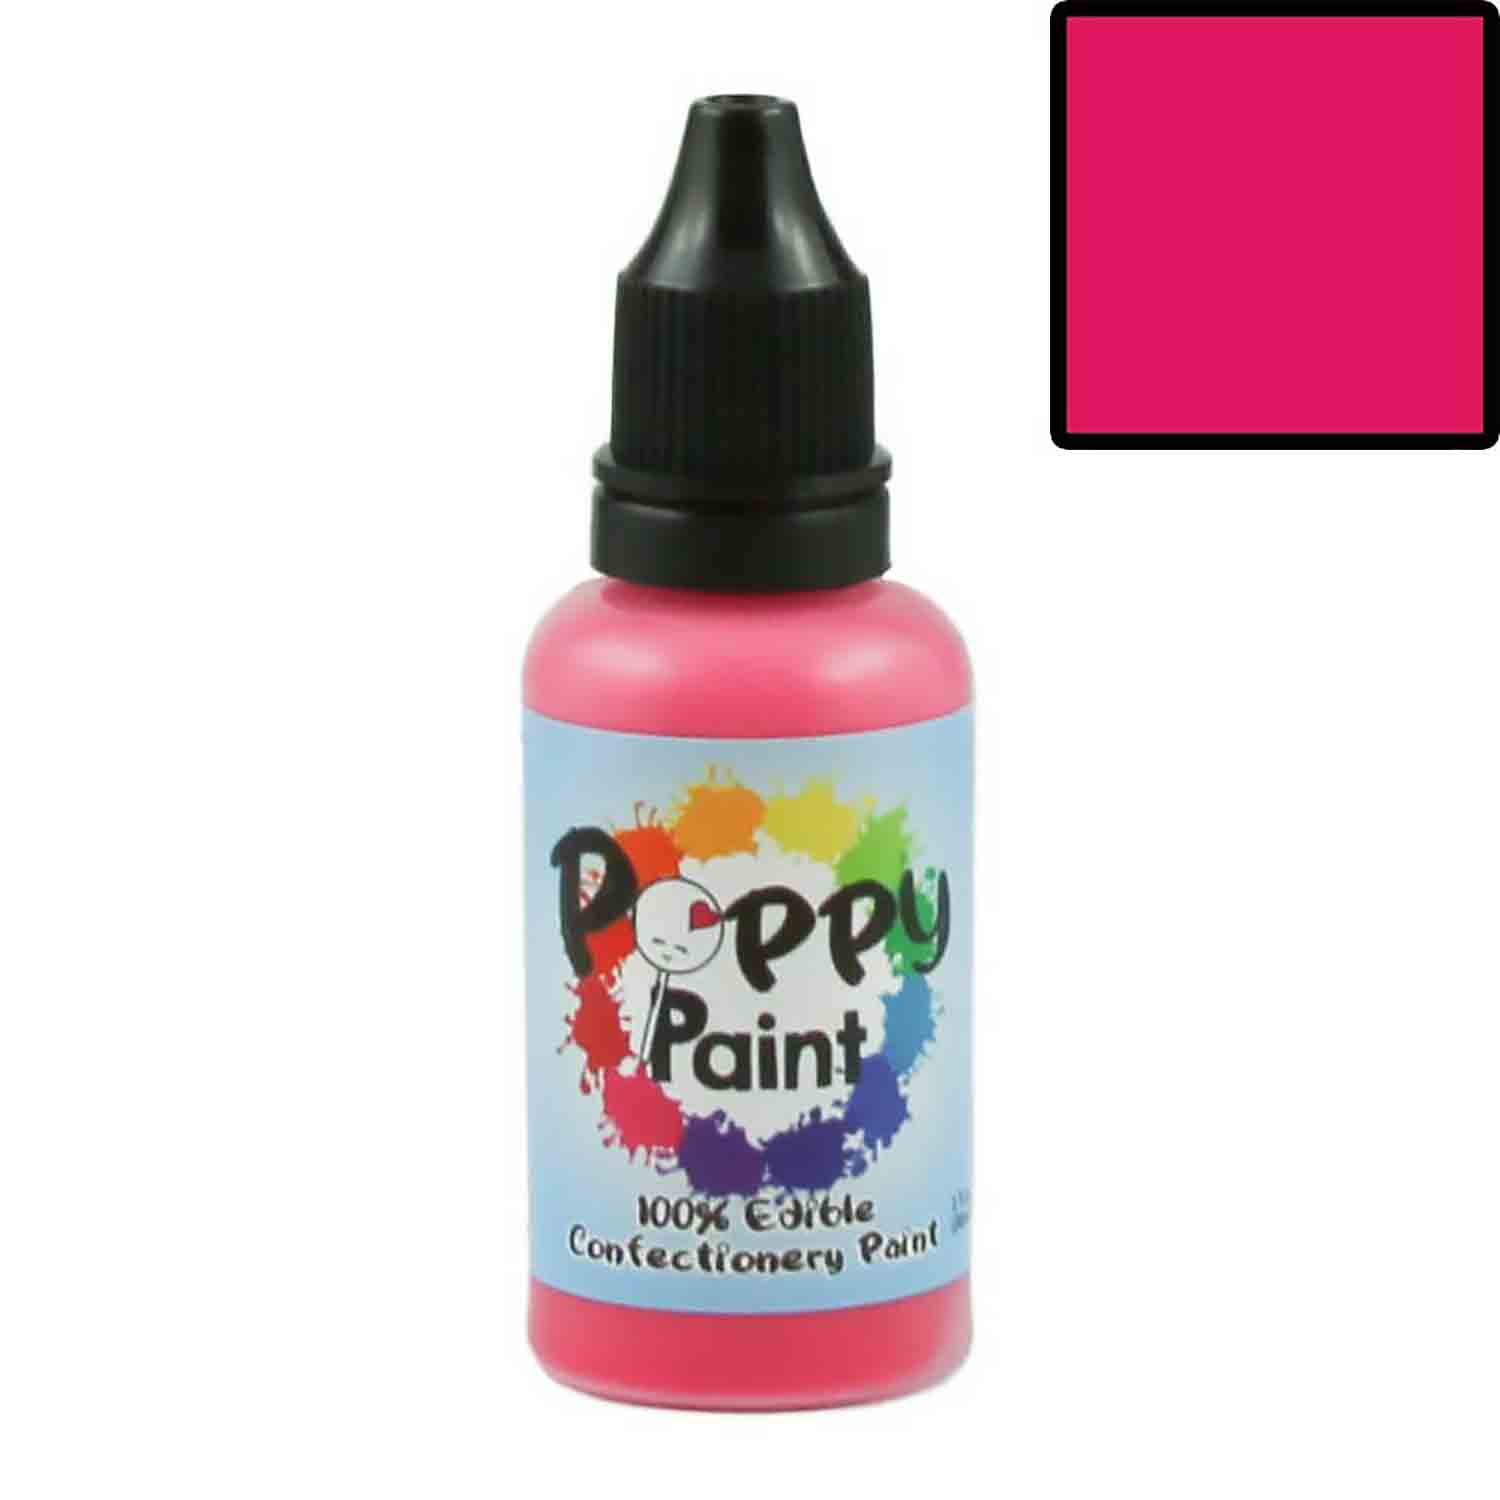 Pink 100% Edible Confectionery Paint